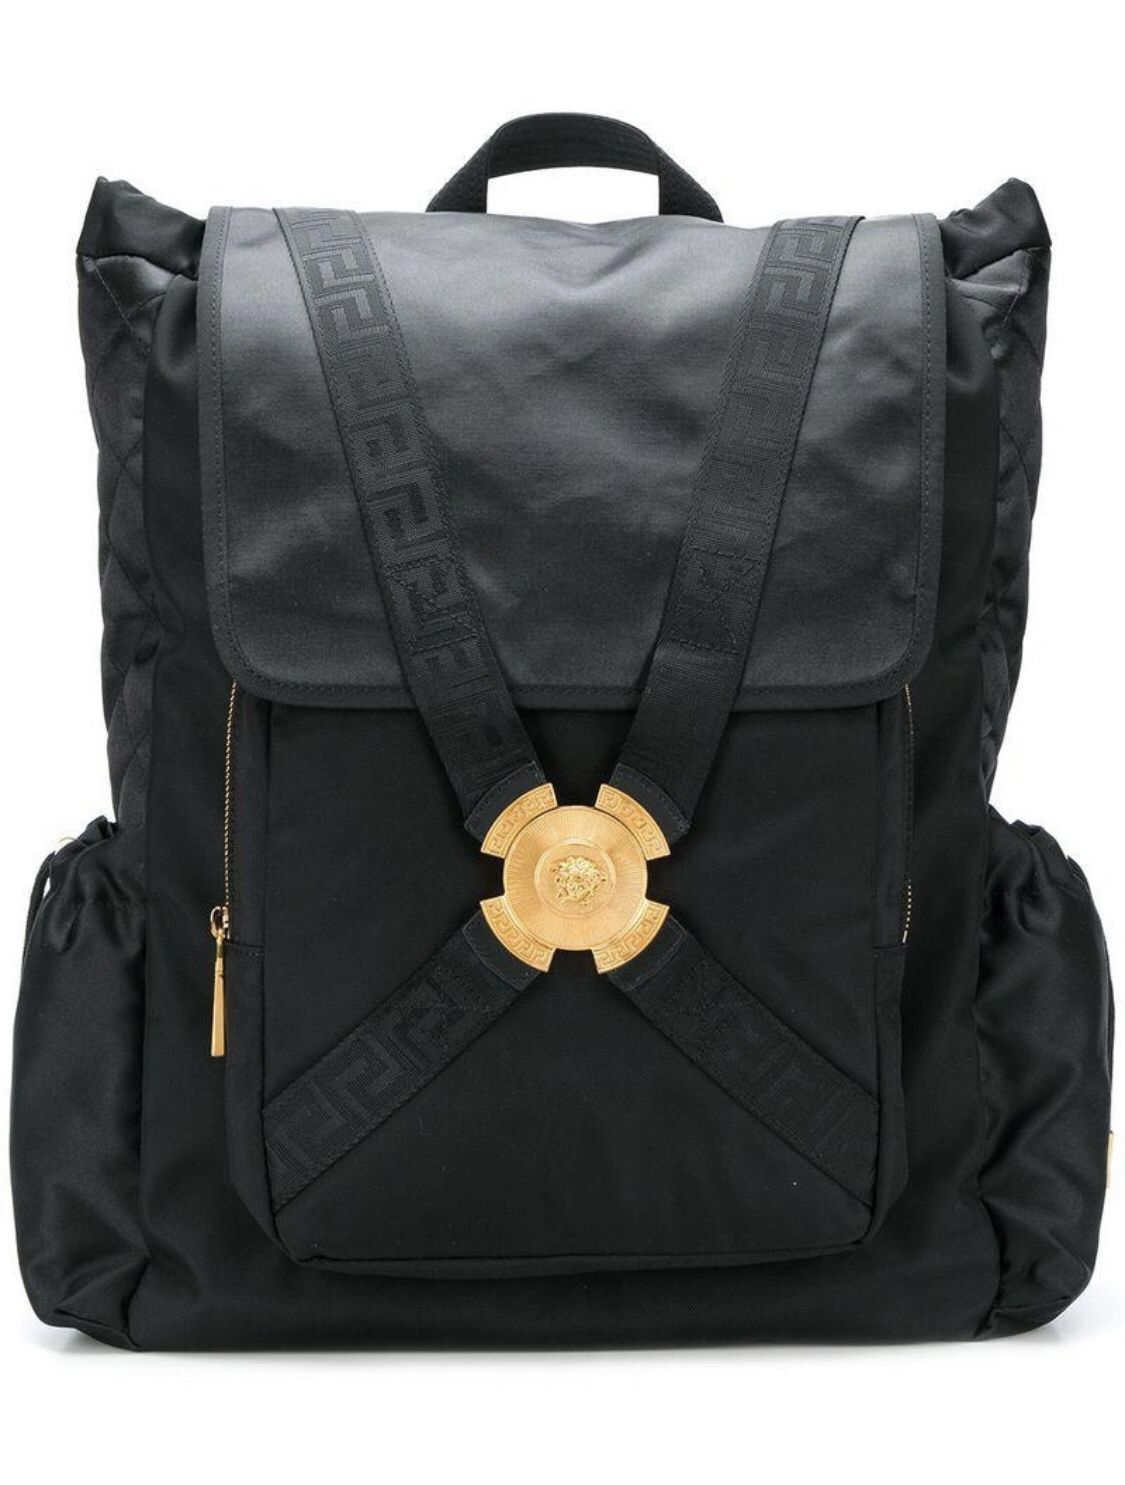 *Extremely Rare* Versace Parachute Cord Nylon Backpack